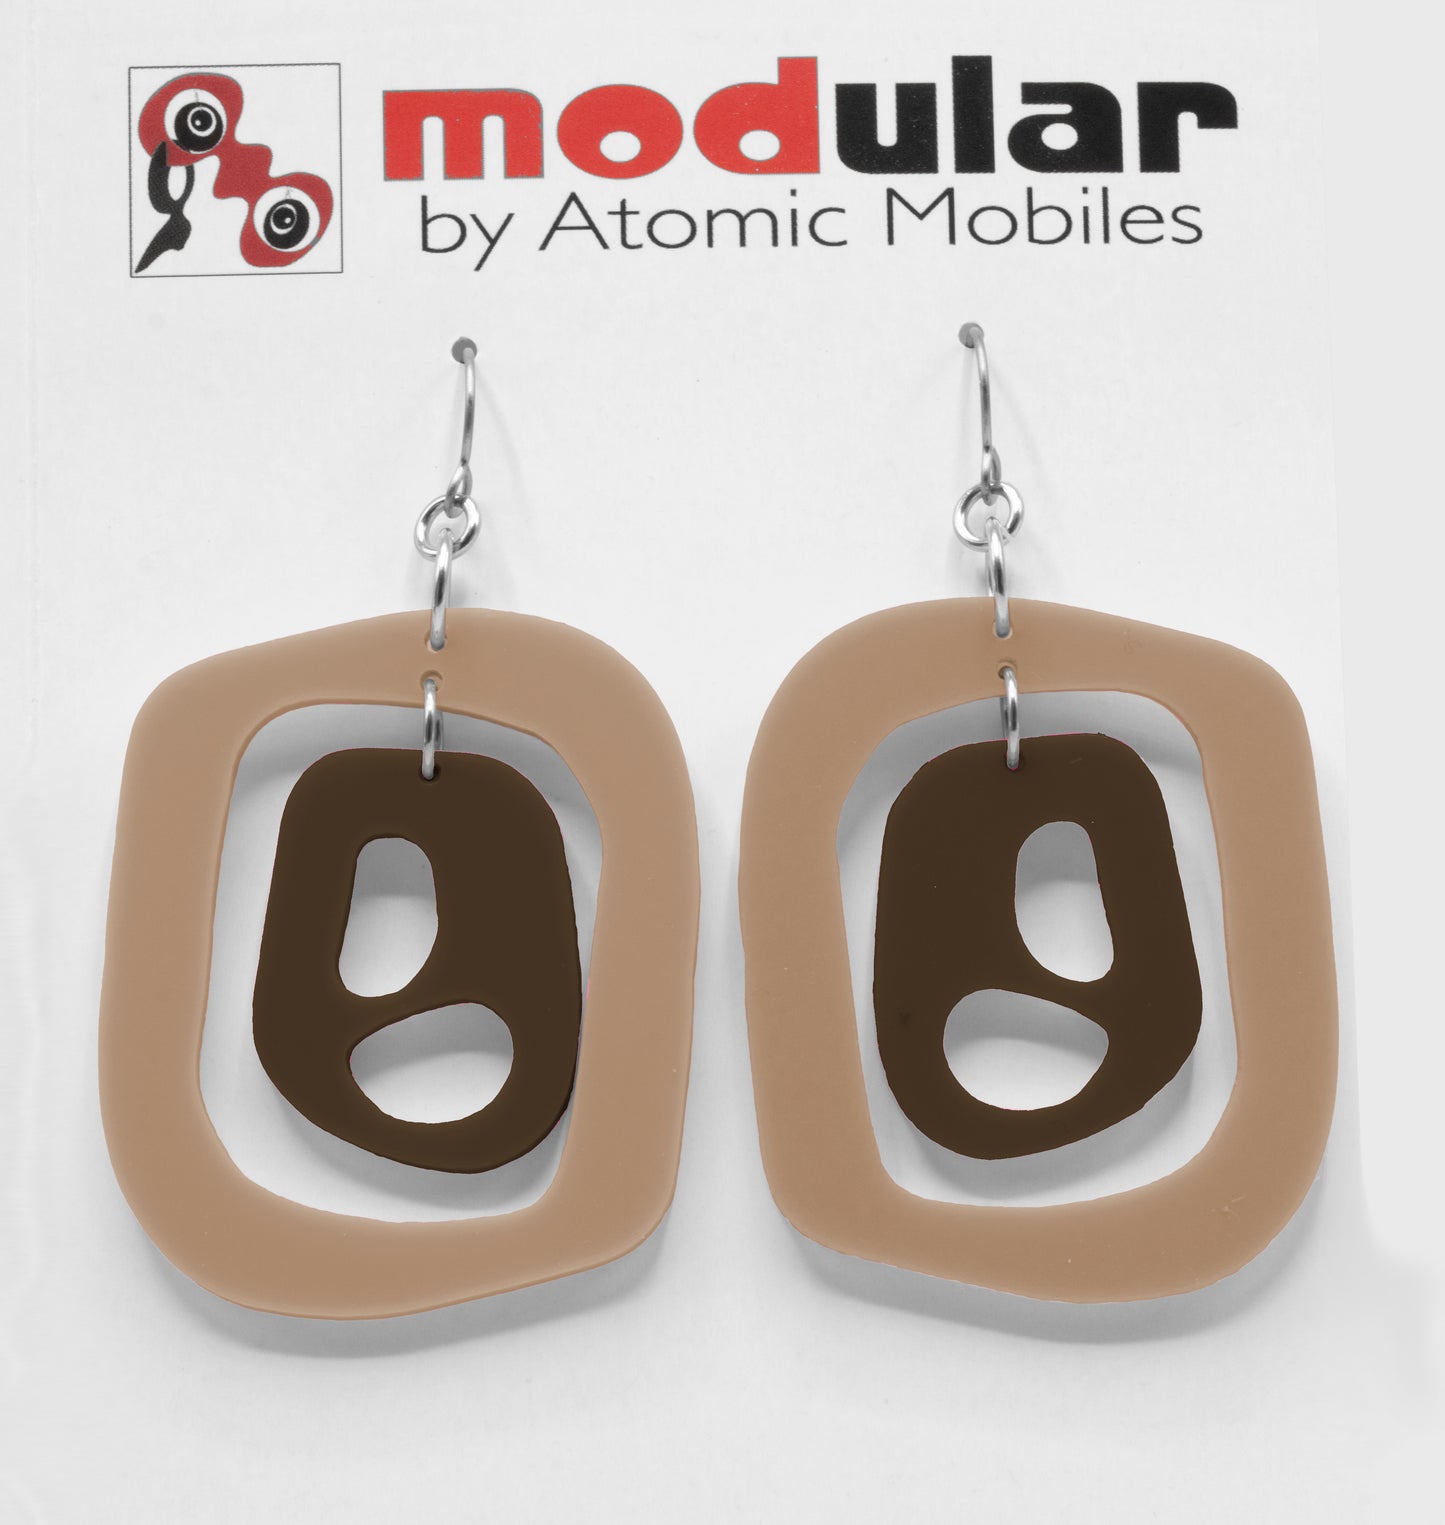 MODular Earrings - Mid 20th Statement Earrings in Beige Tan and Brown by AtomicMobiles.com - retro era mod handmade jewelry